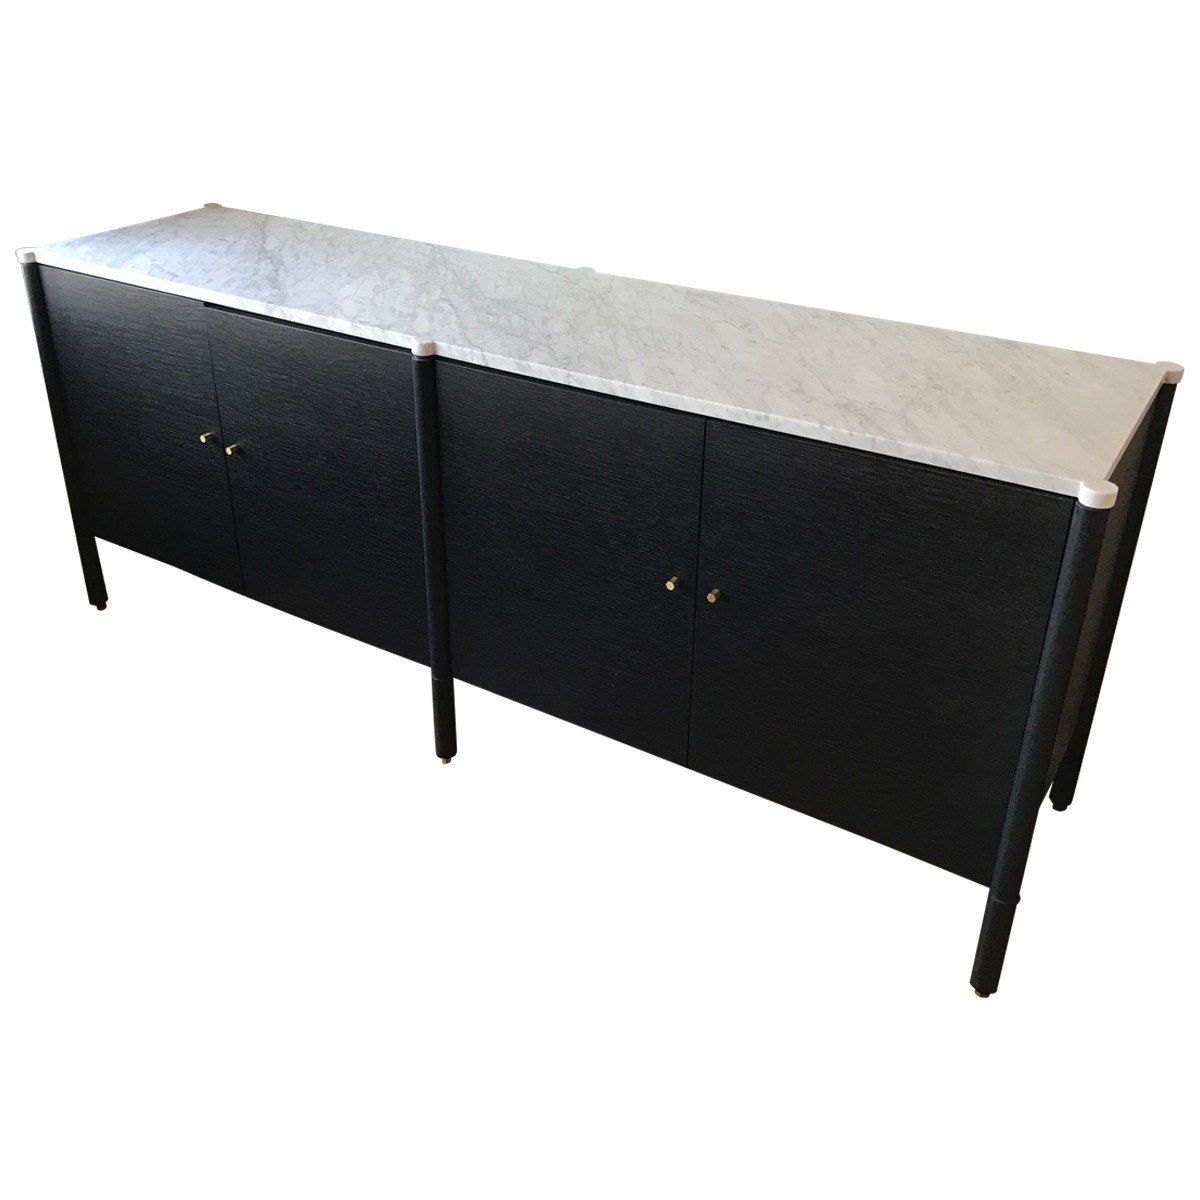 Morrison Credenza Within Exagonal Geometry Credenzas (View 28 of 30)